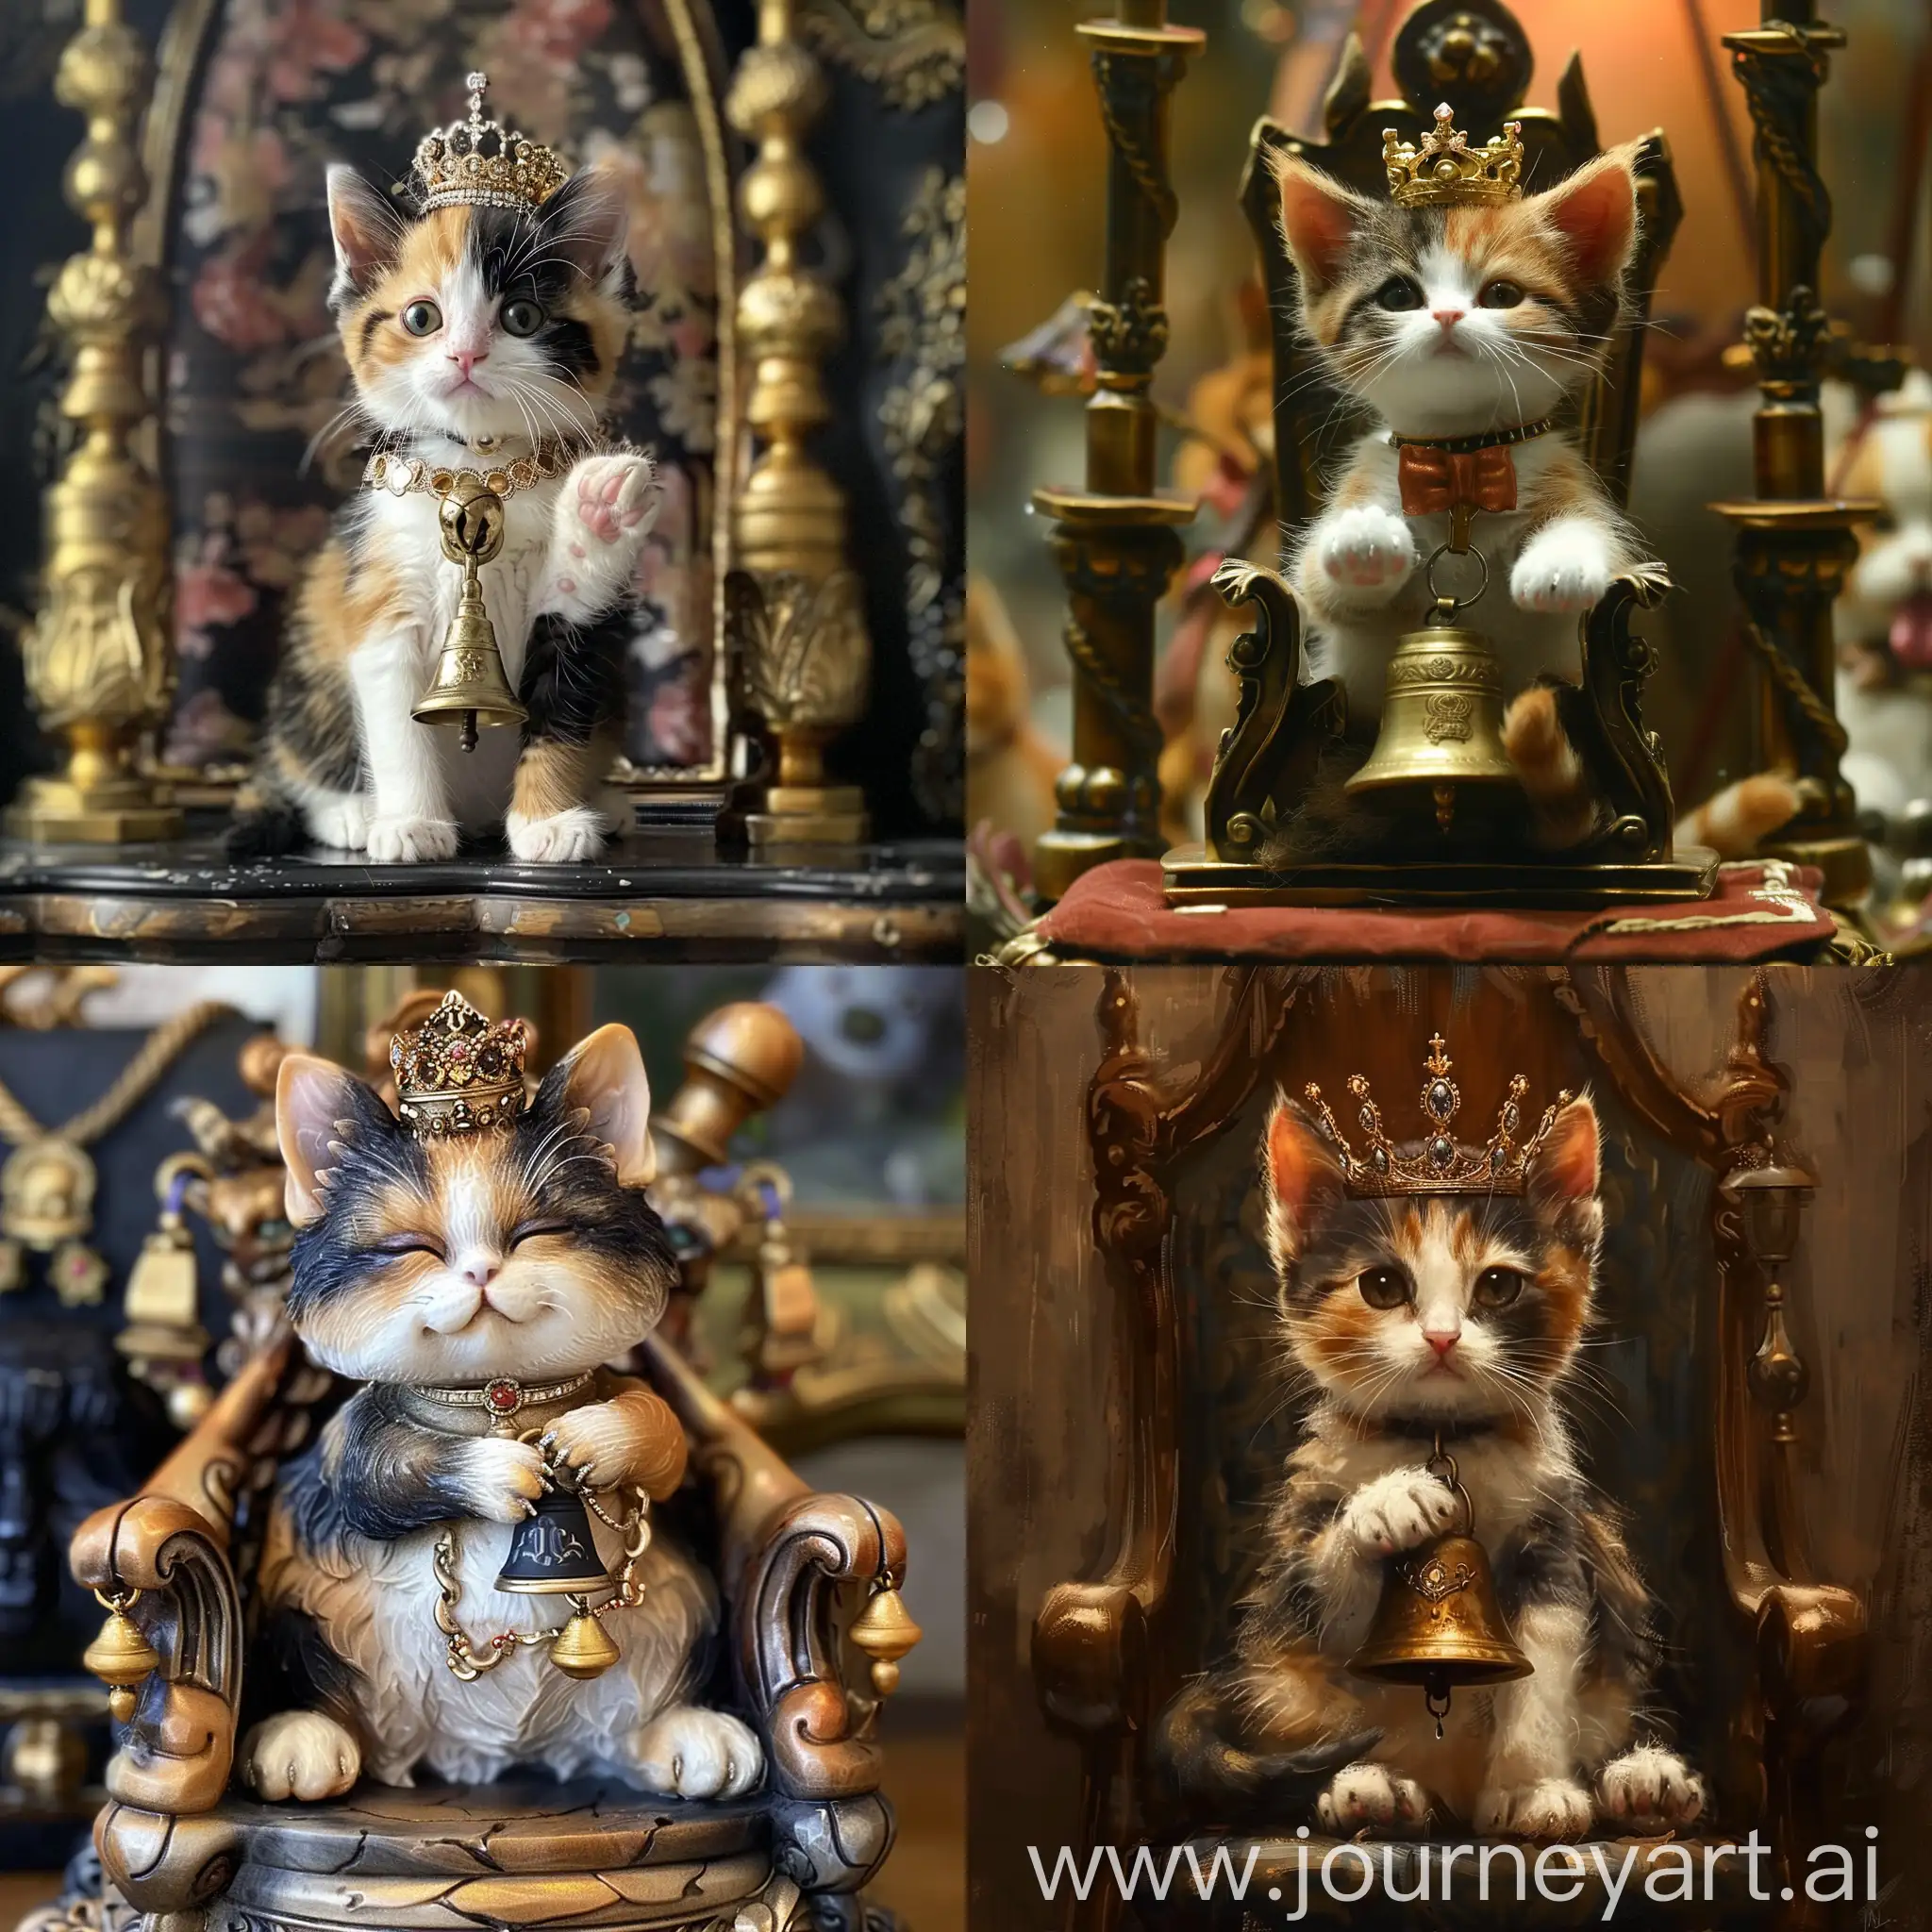 small calico cat sitting on a throne, wearing a tiara, and ringing a bell. 
